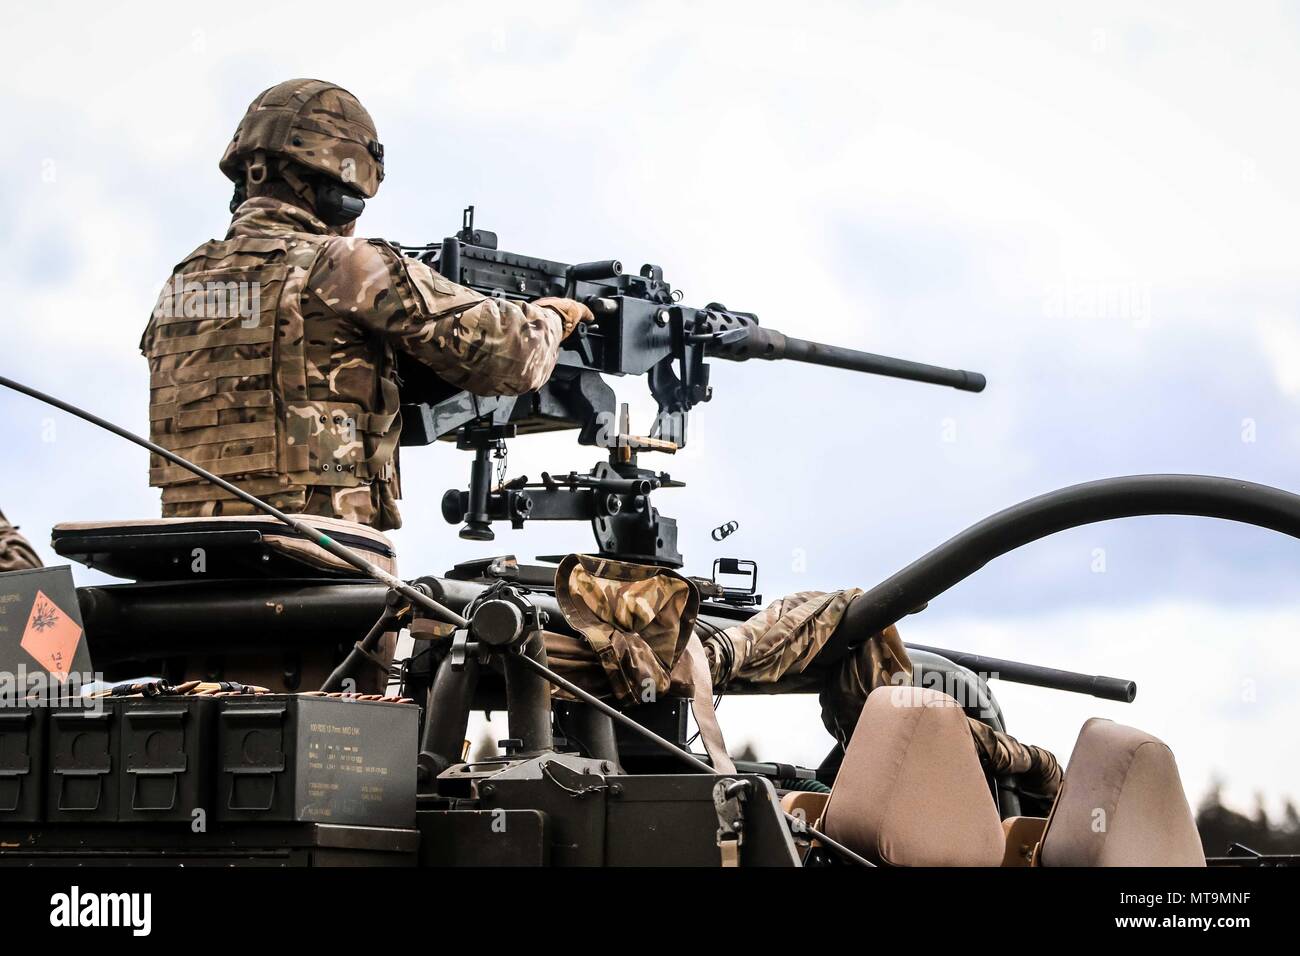 U.K. army Cpl. Will Wright, crew commander with 1st The Queen's Dragoon Guards, fires an L111A1 Heavy machine gun during a four-day weapons training event with Battle Group Poland at Bemowo Piskie Training Area, Poland, on May 17, 2018. Battle Group Poland is a unique, multinational coalition of U.S., U.K., Croatian and Romanian Soldiers who serve with the Polish 15th Mechanized Brigade as a deterrence force in support of NATO’s Enhanced Forward Presence. (U.S. Army photo by Spc. Hubert D. Delany III /22nd Mobile Public Affairs Detachment) Stock Photo